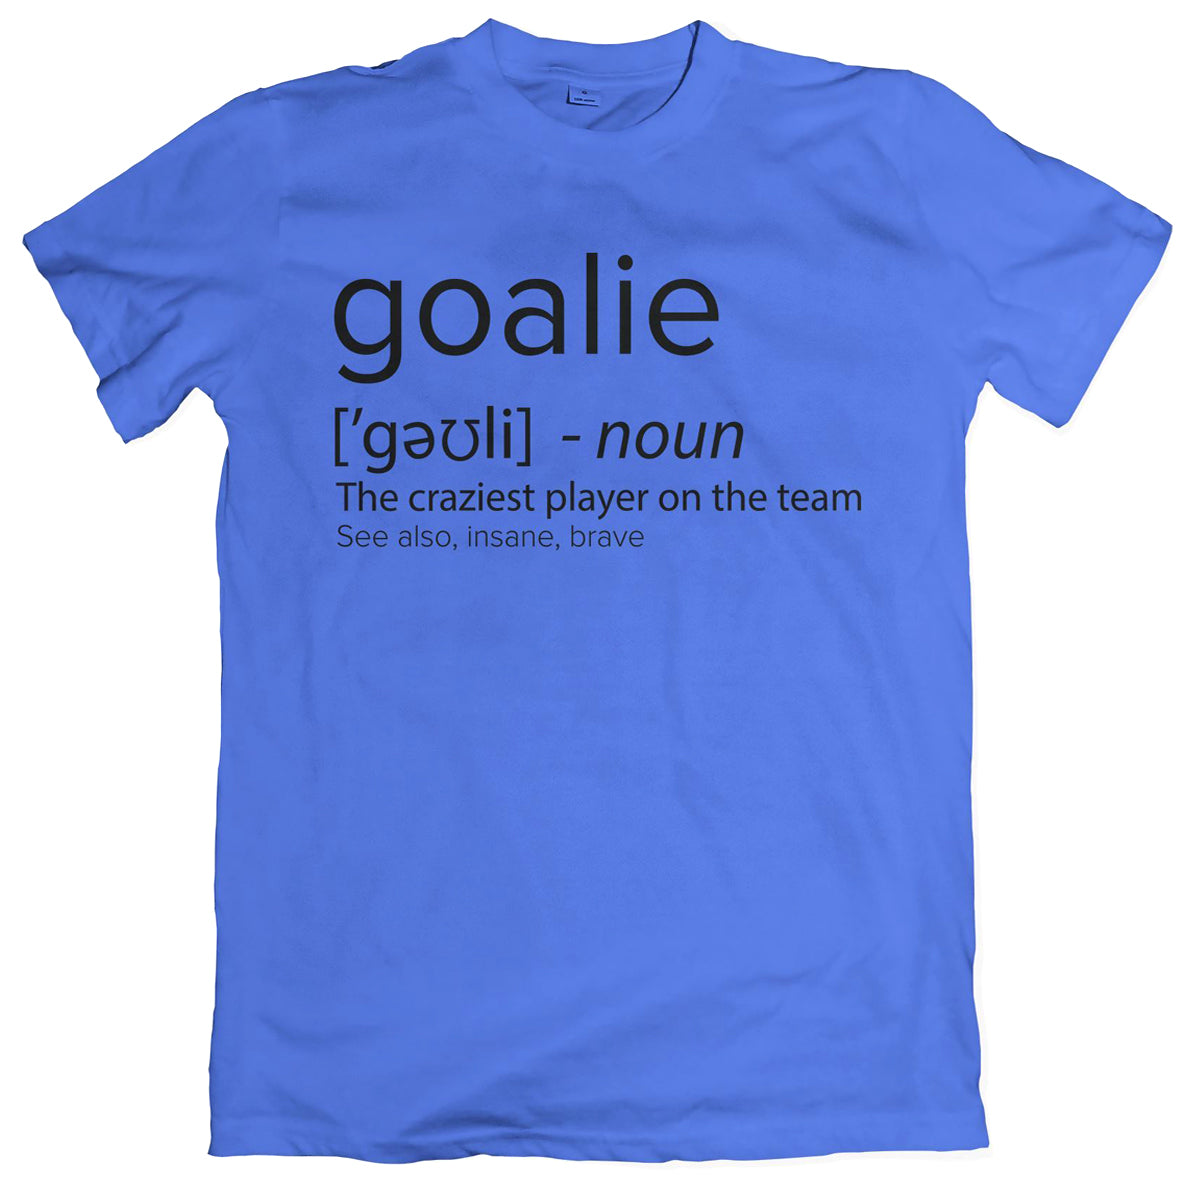 Goalie Definition T-Shirt Shirts 411 Youth Small Royal Blue 